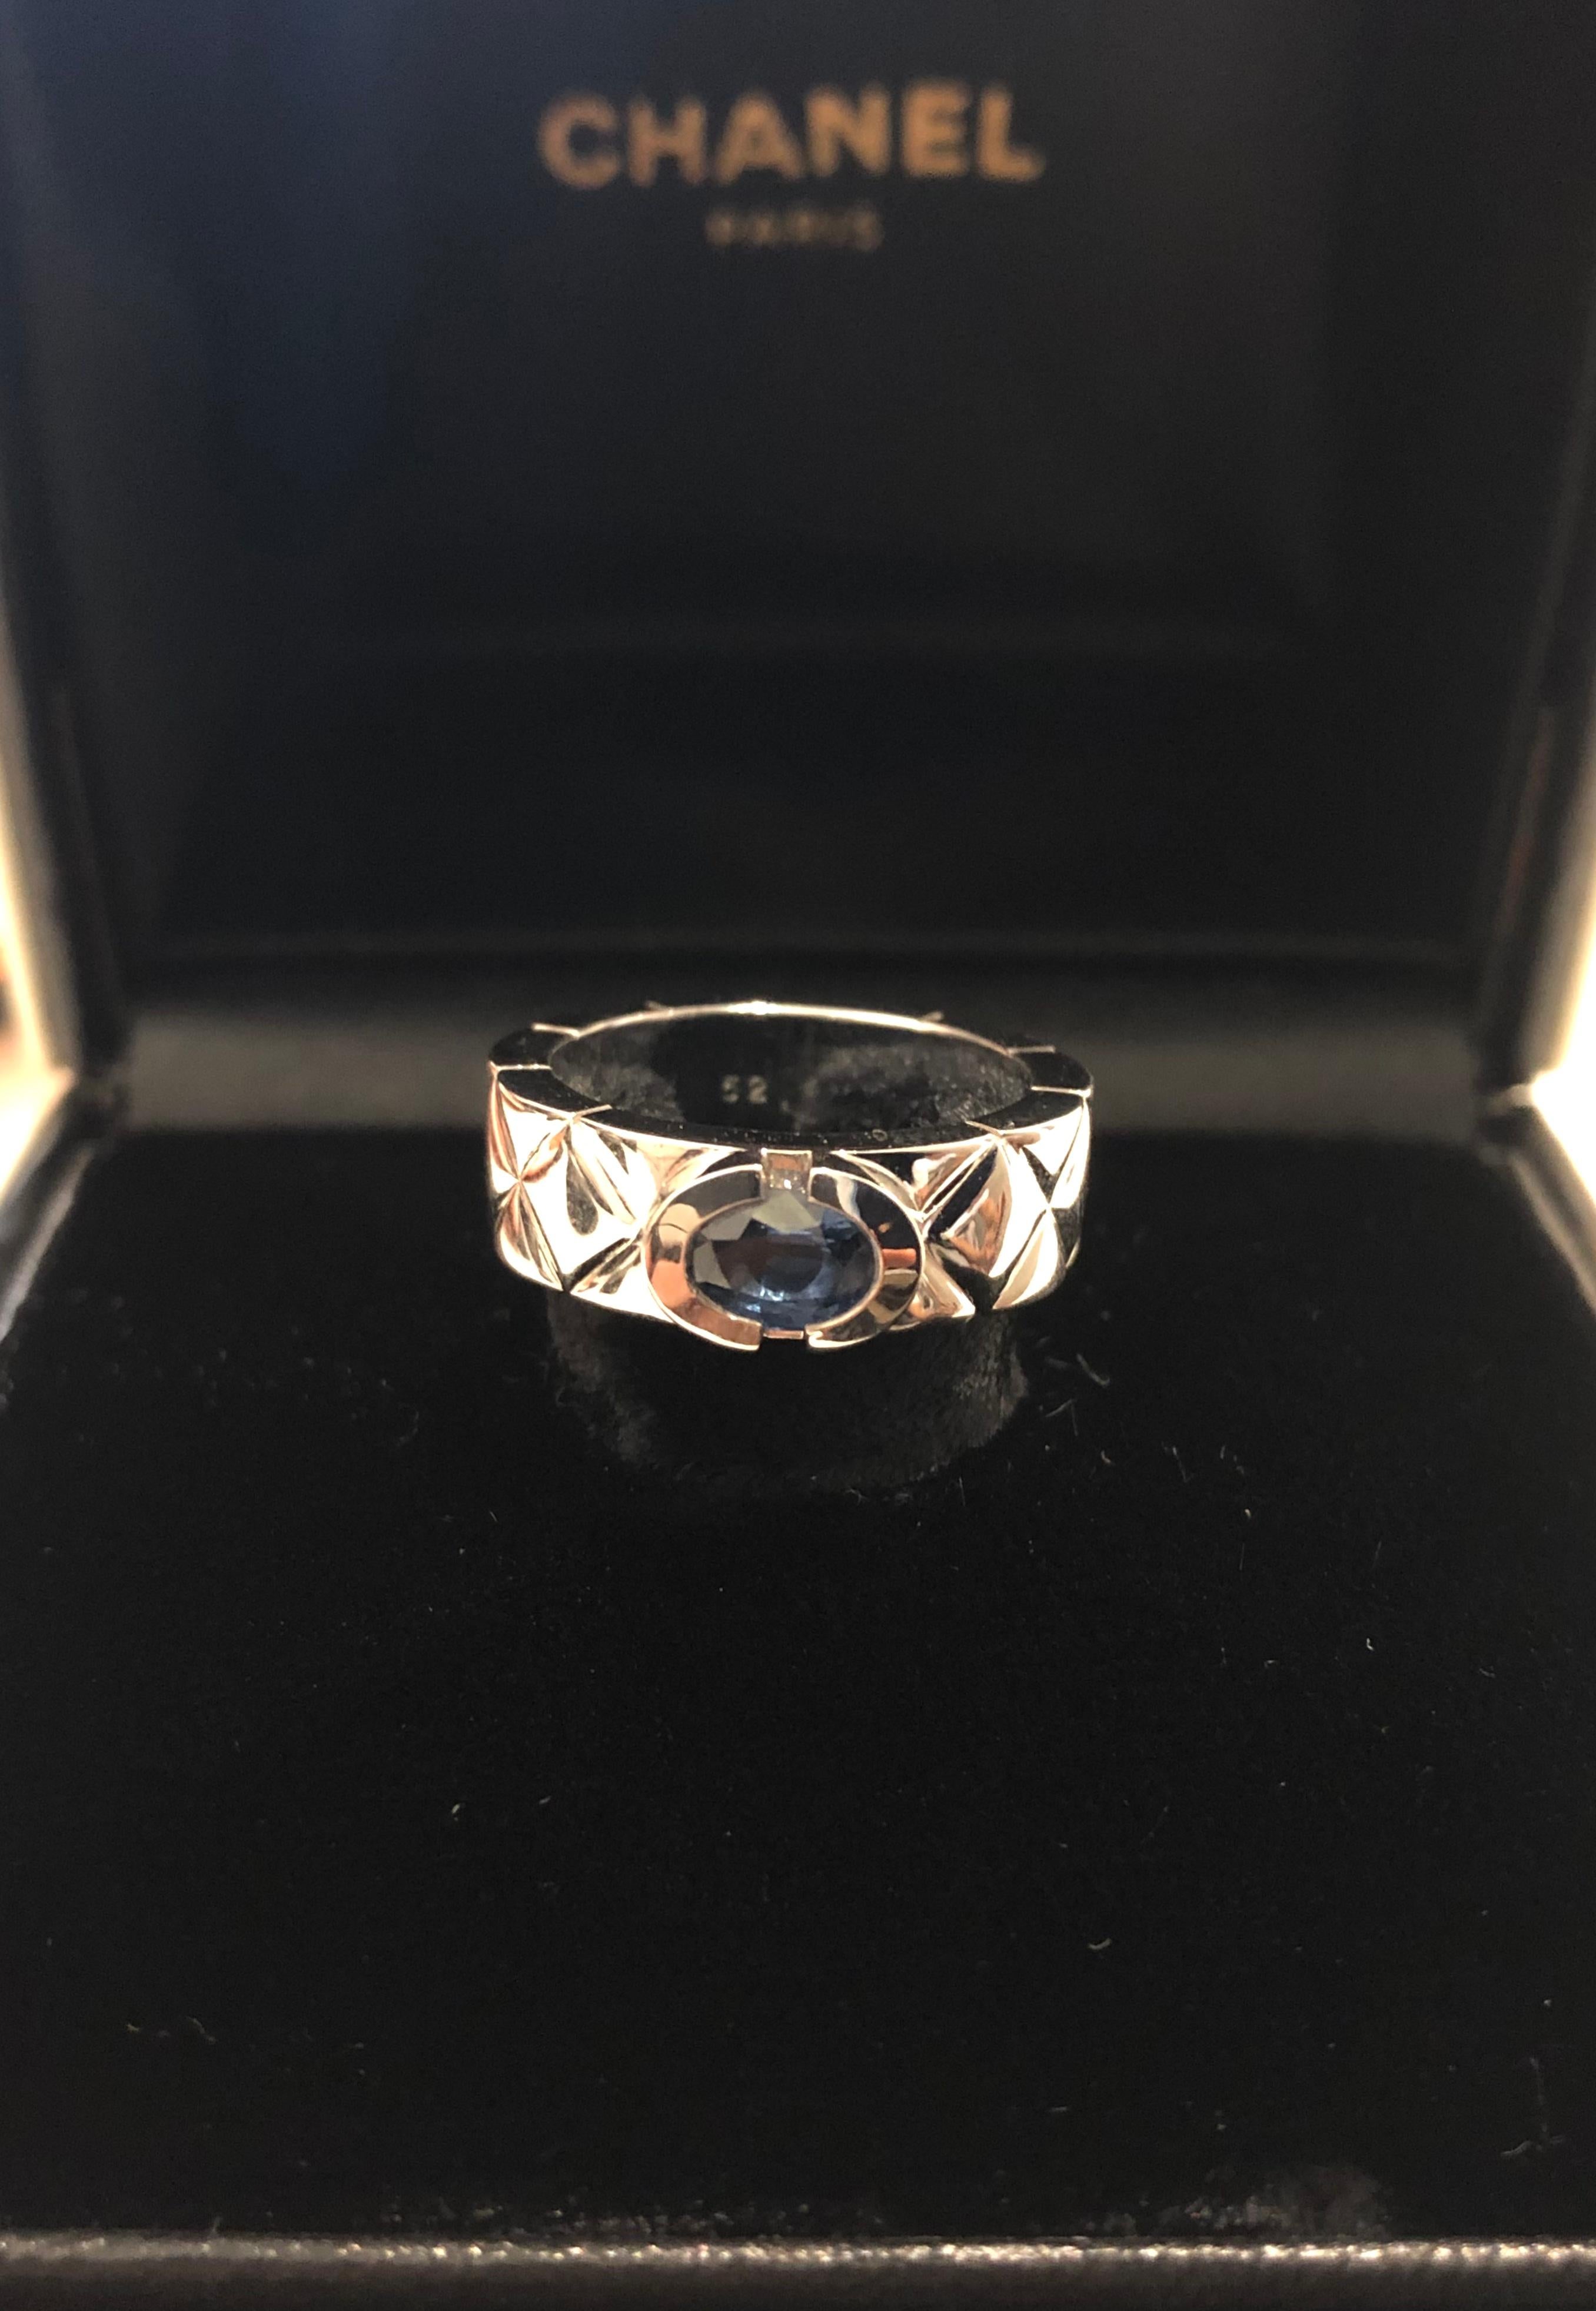 CHANEL band ring set in 18K white gold with Matelasse pattern centered a faceted oval blue sapphire. Weighs approximately 12.58 grams. Comes with box.

Stamped CHANEL 750 52 15T 527

Size 5.75 (US) 51.5 (EU)

Condition: Excellent with very minor